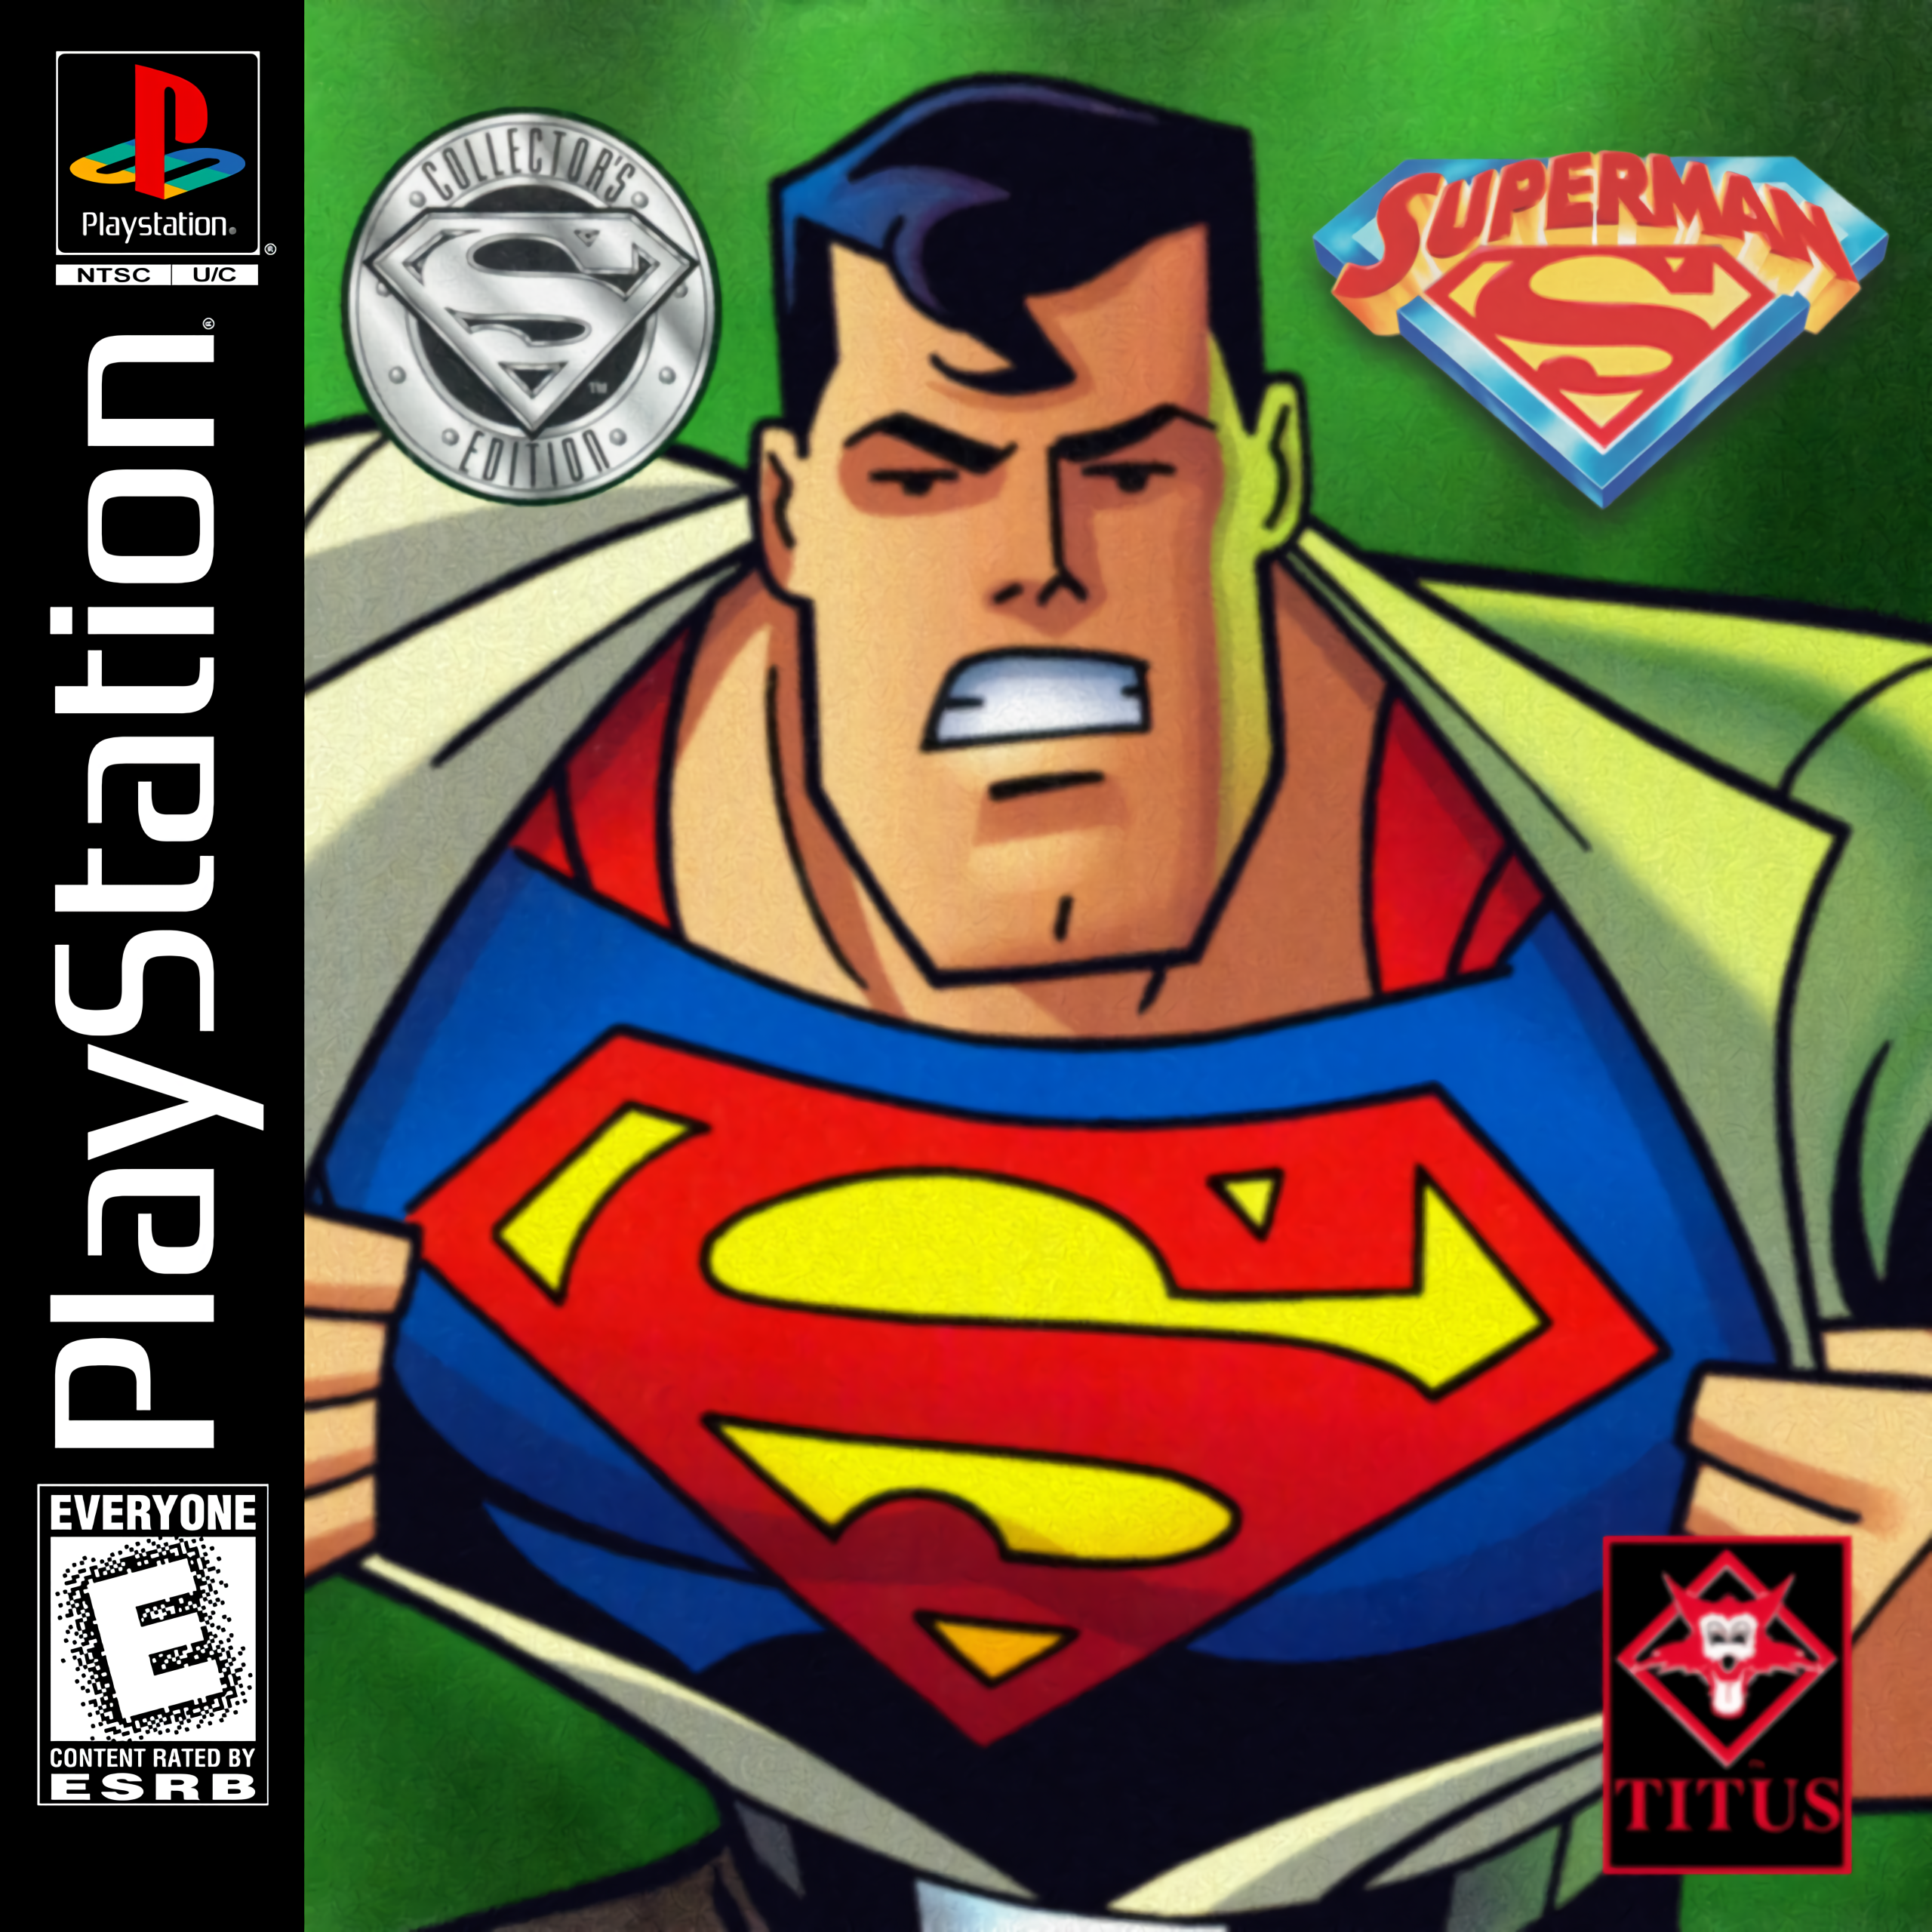 Superman (2000) - PlayStation Front Cover by TheYoungHistorian on DeviantArt